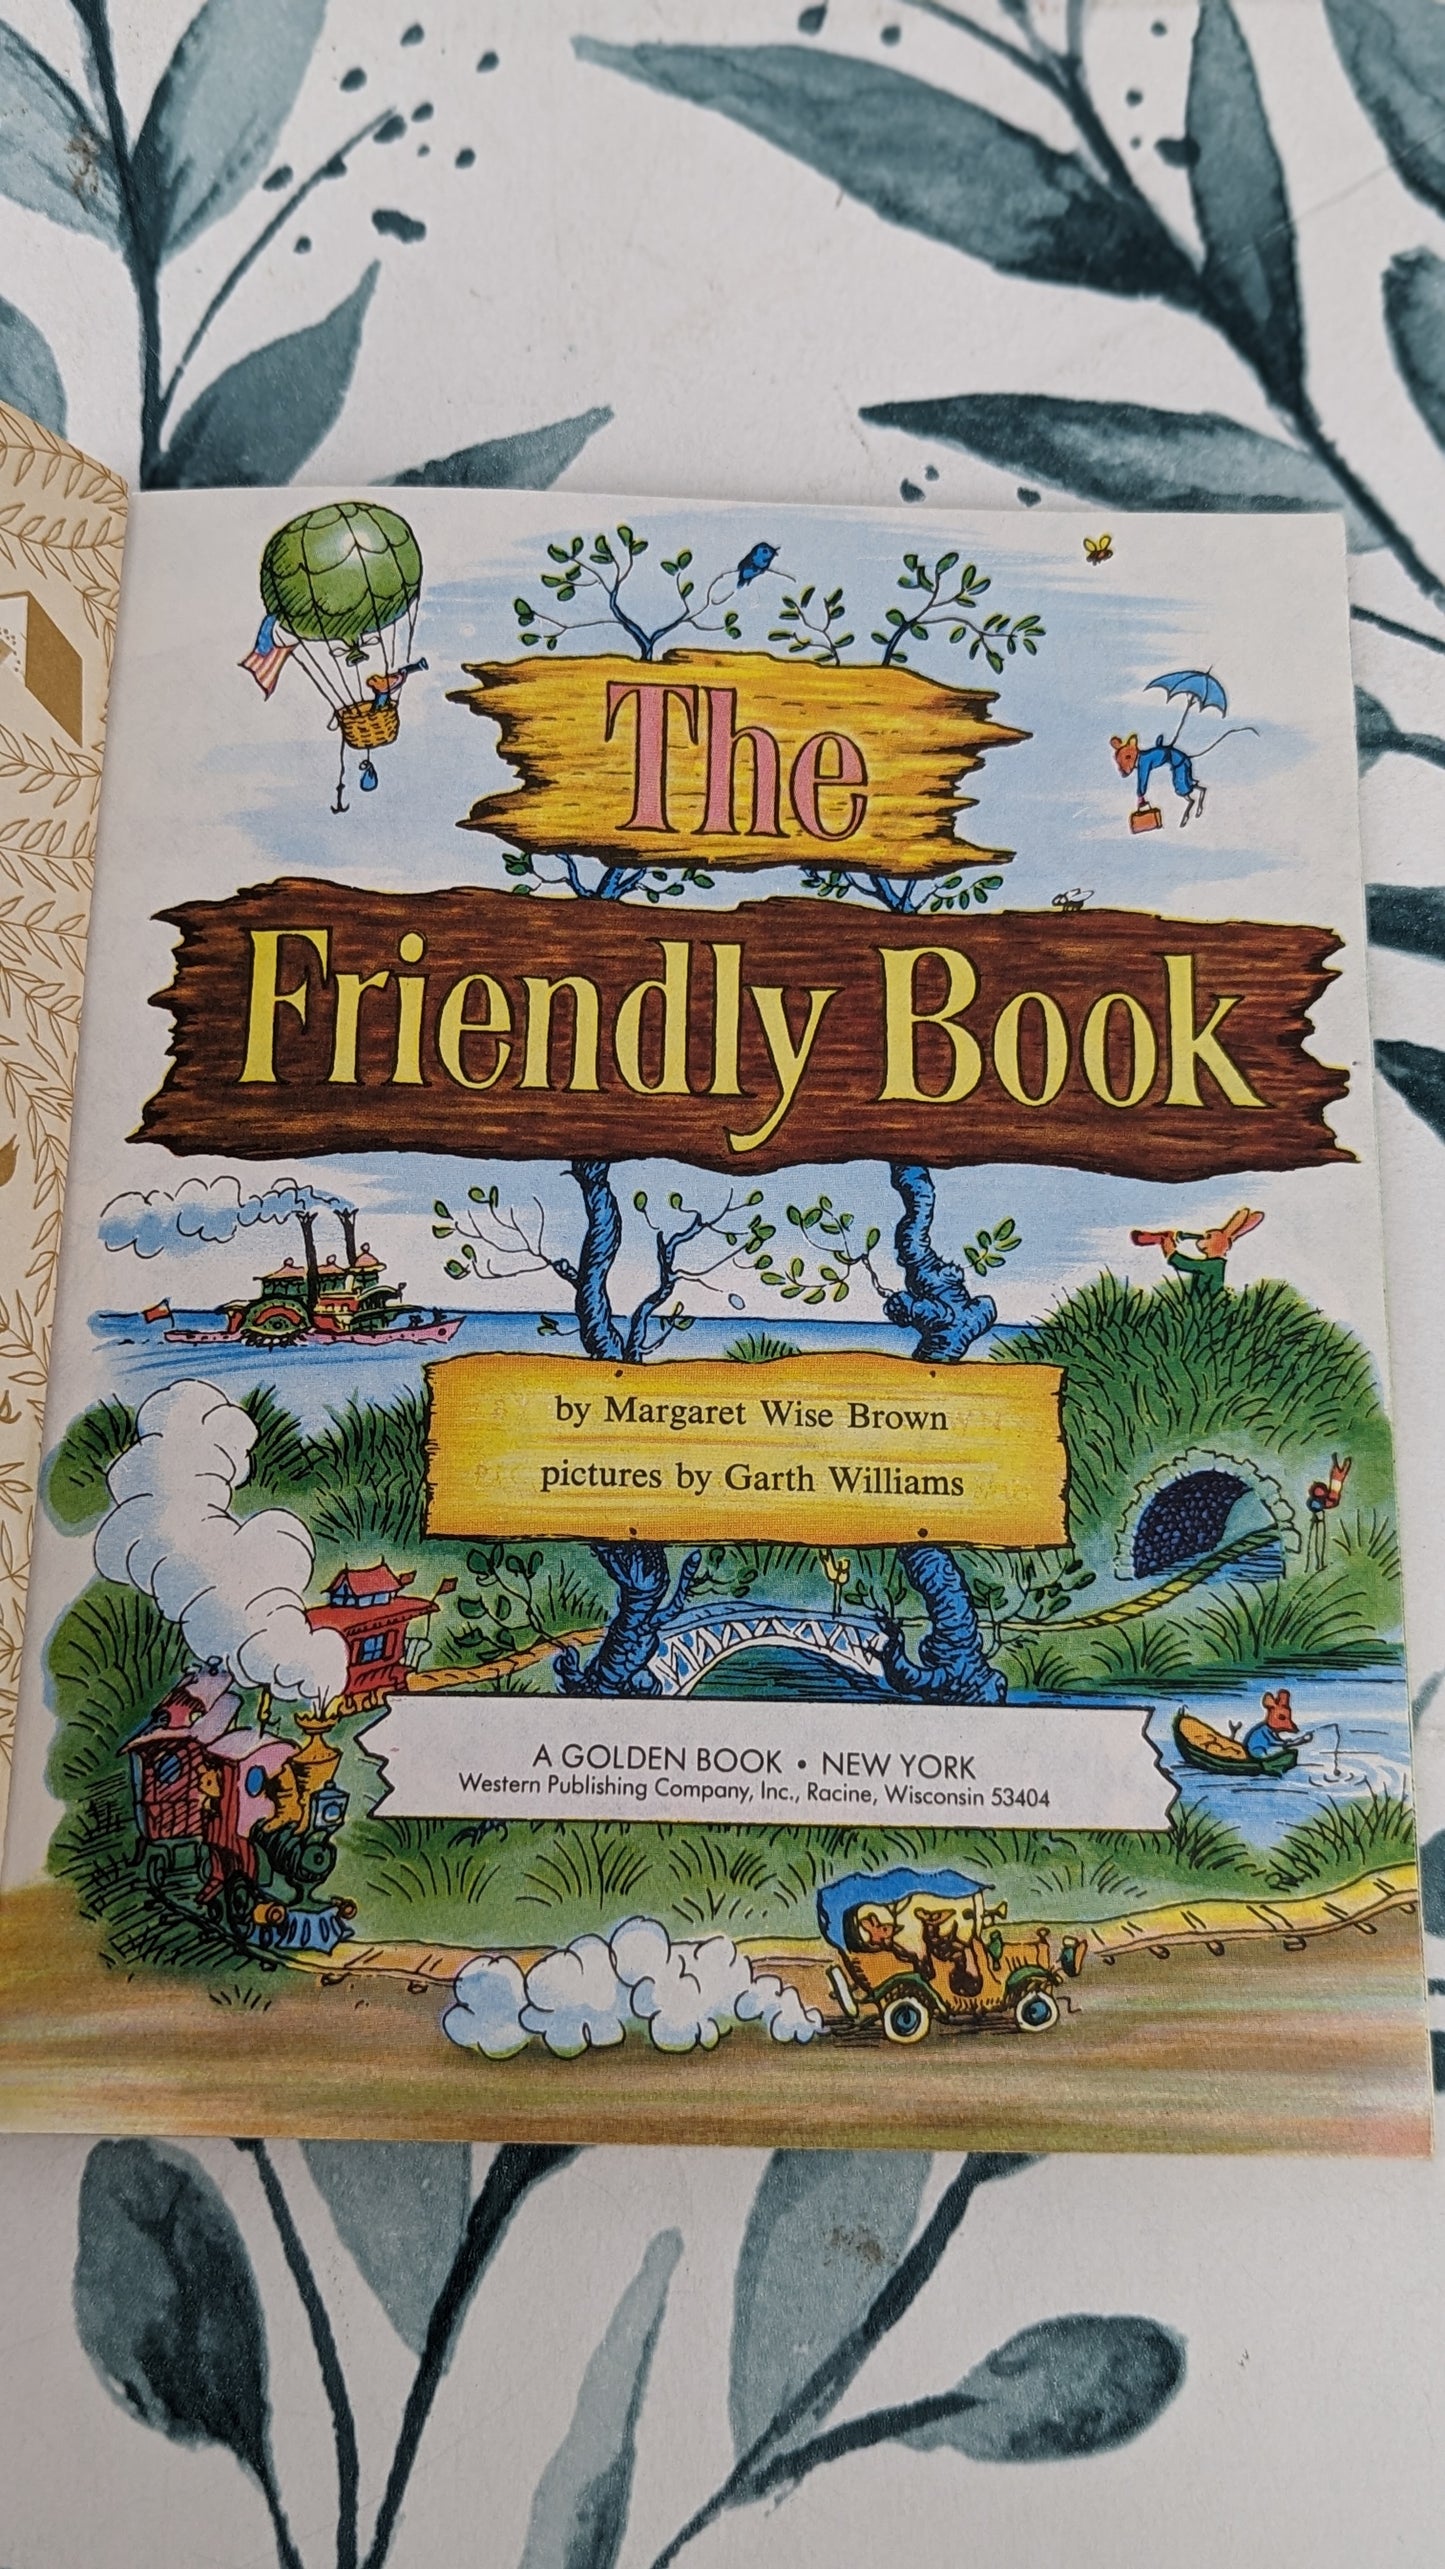 Little Golden Book: The Friendly Book (Margaret Wise Brown and Garth Williams)